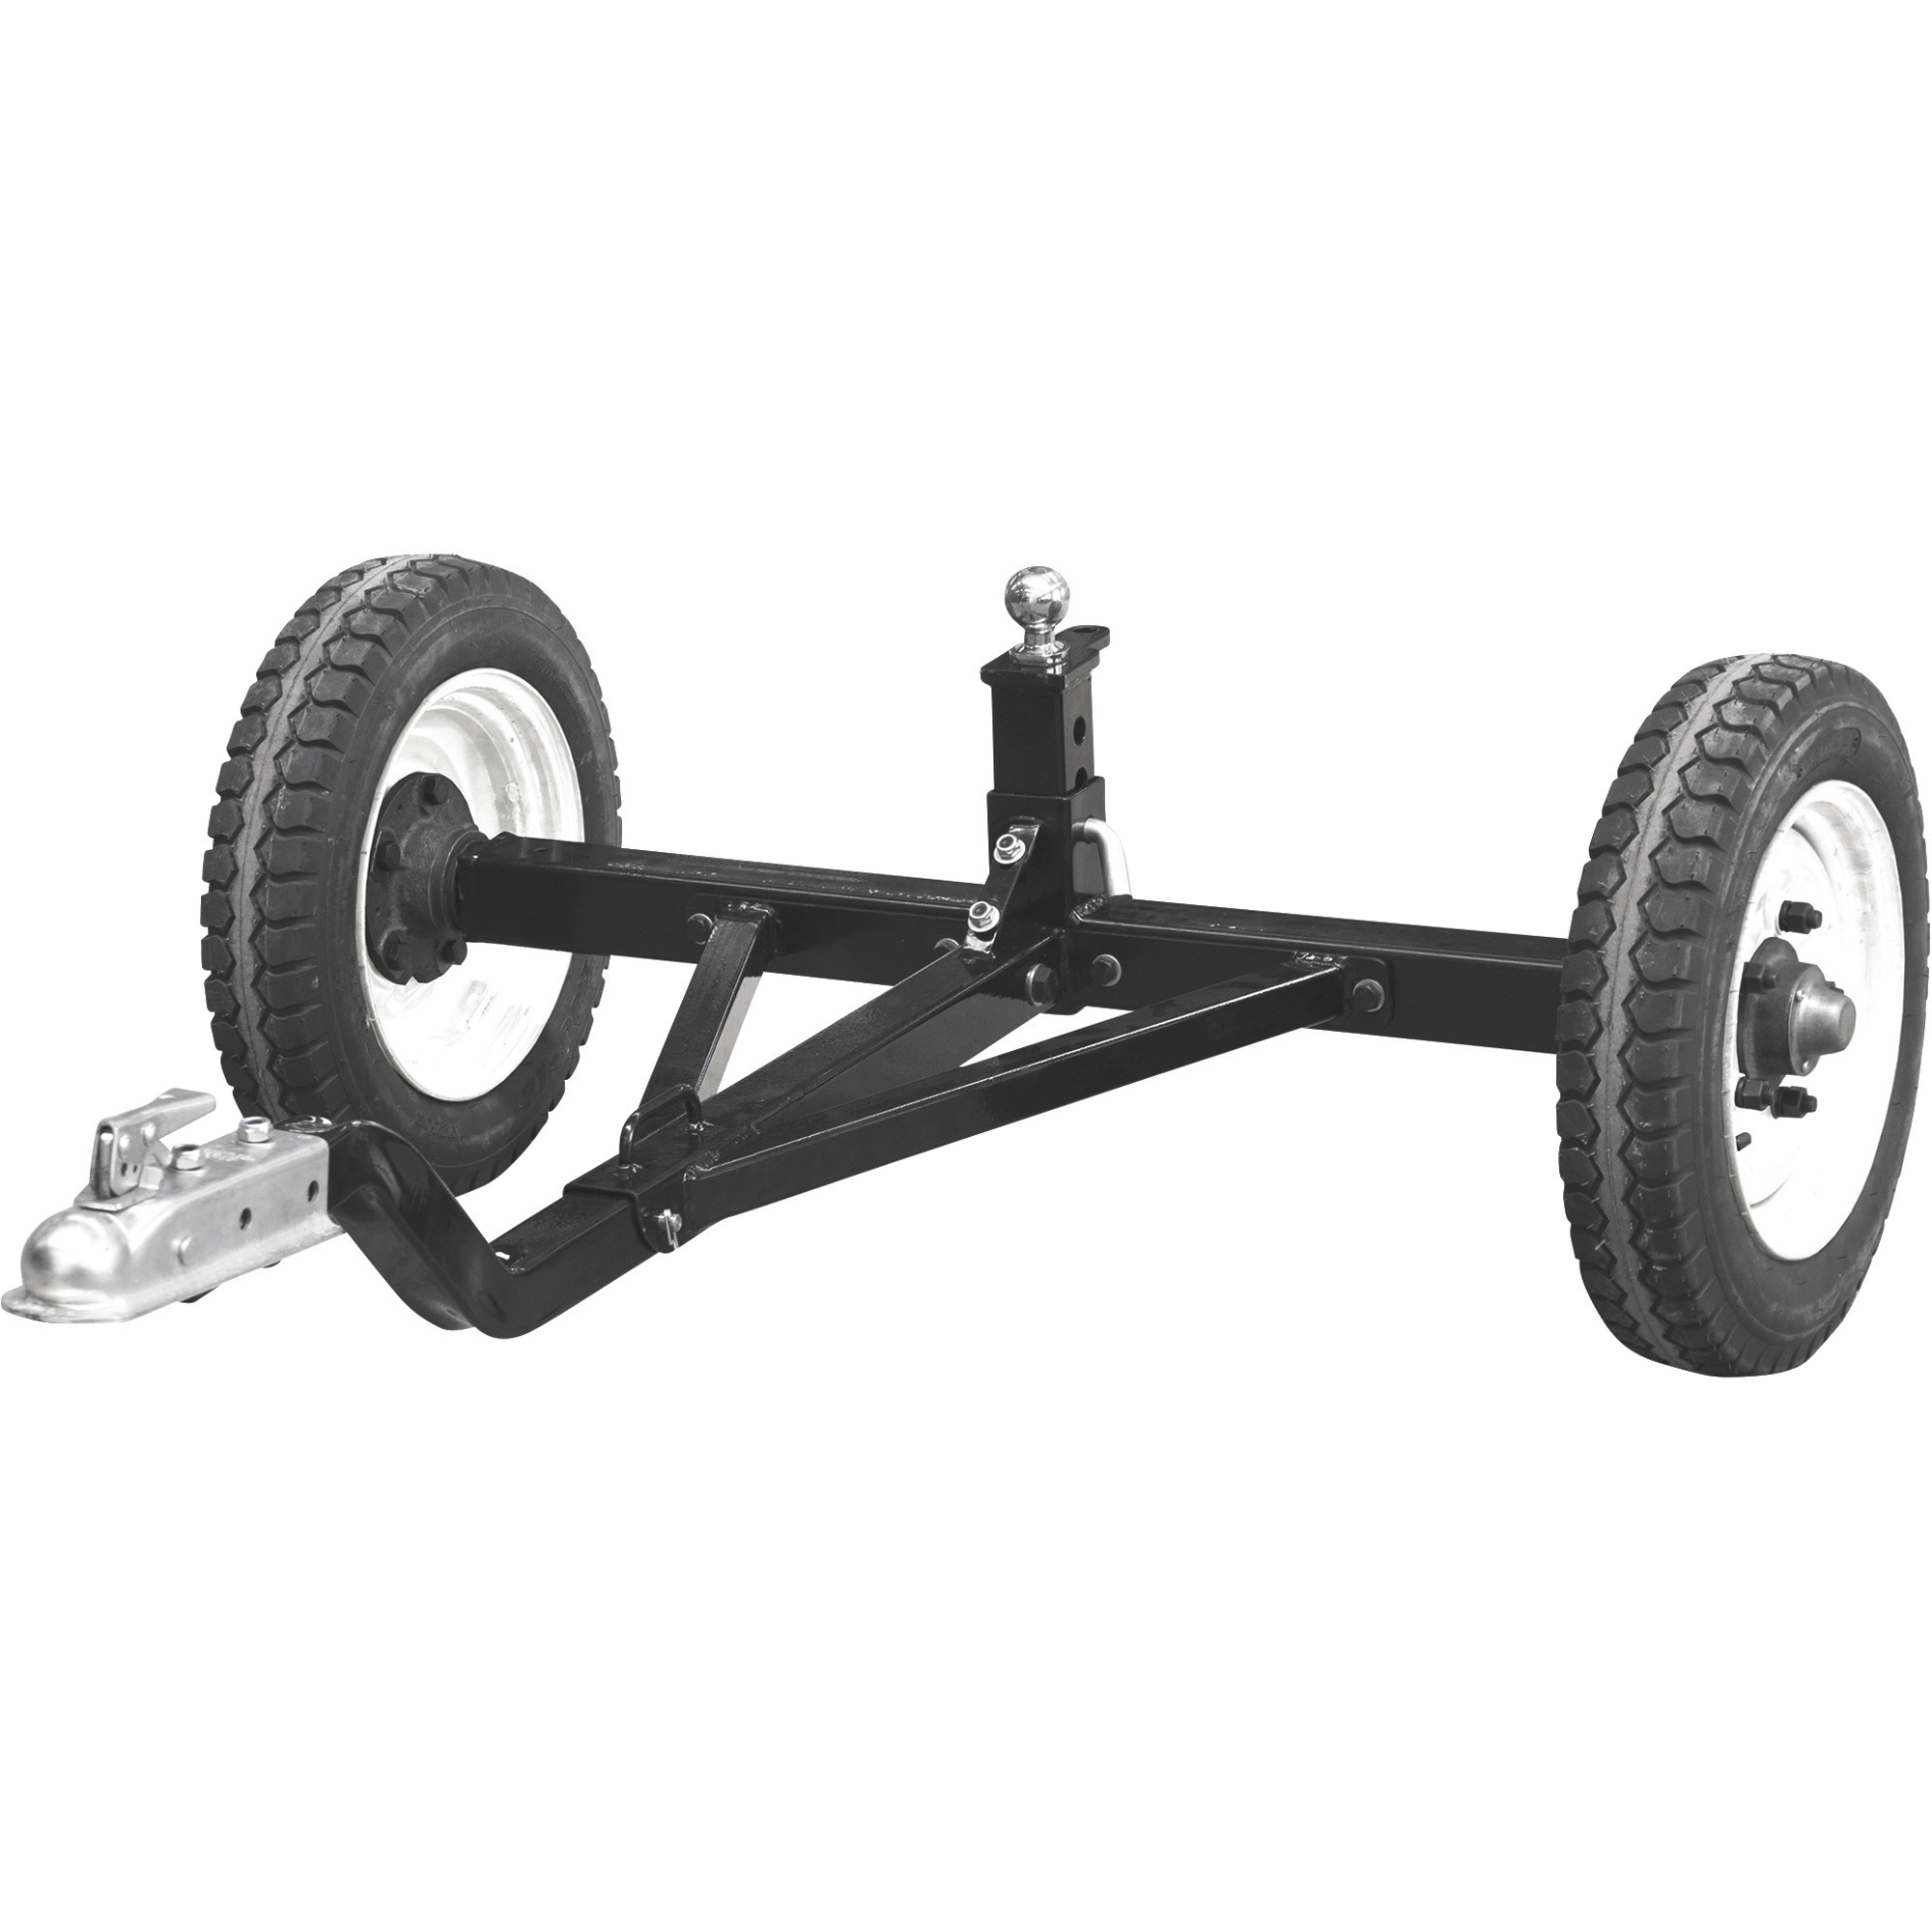 Tow-Tuff ATV Weight Distribution Dolly â 1,200-Lb. Capacity, Model TMD-1200ATV